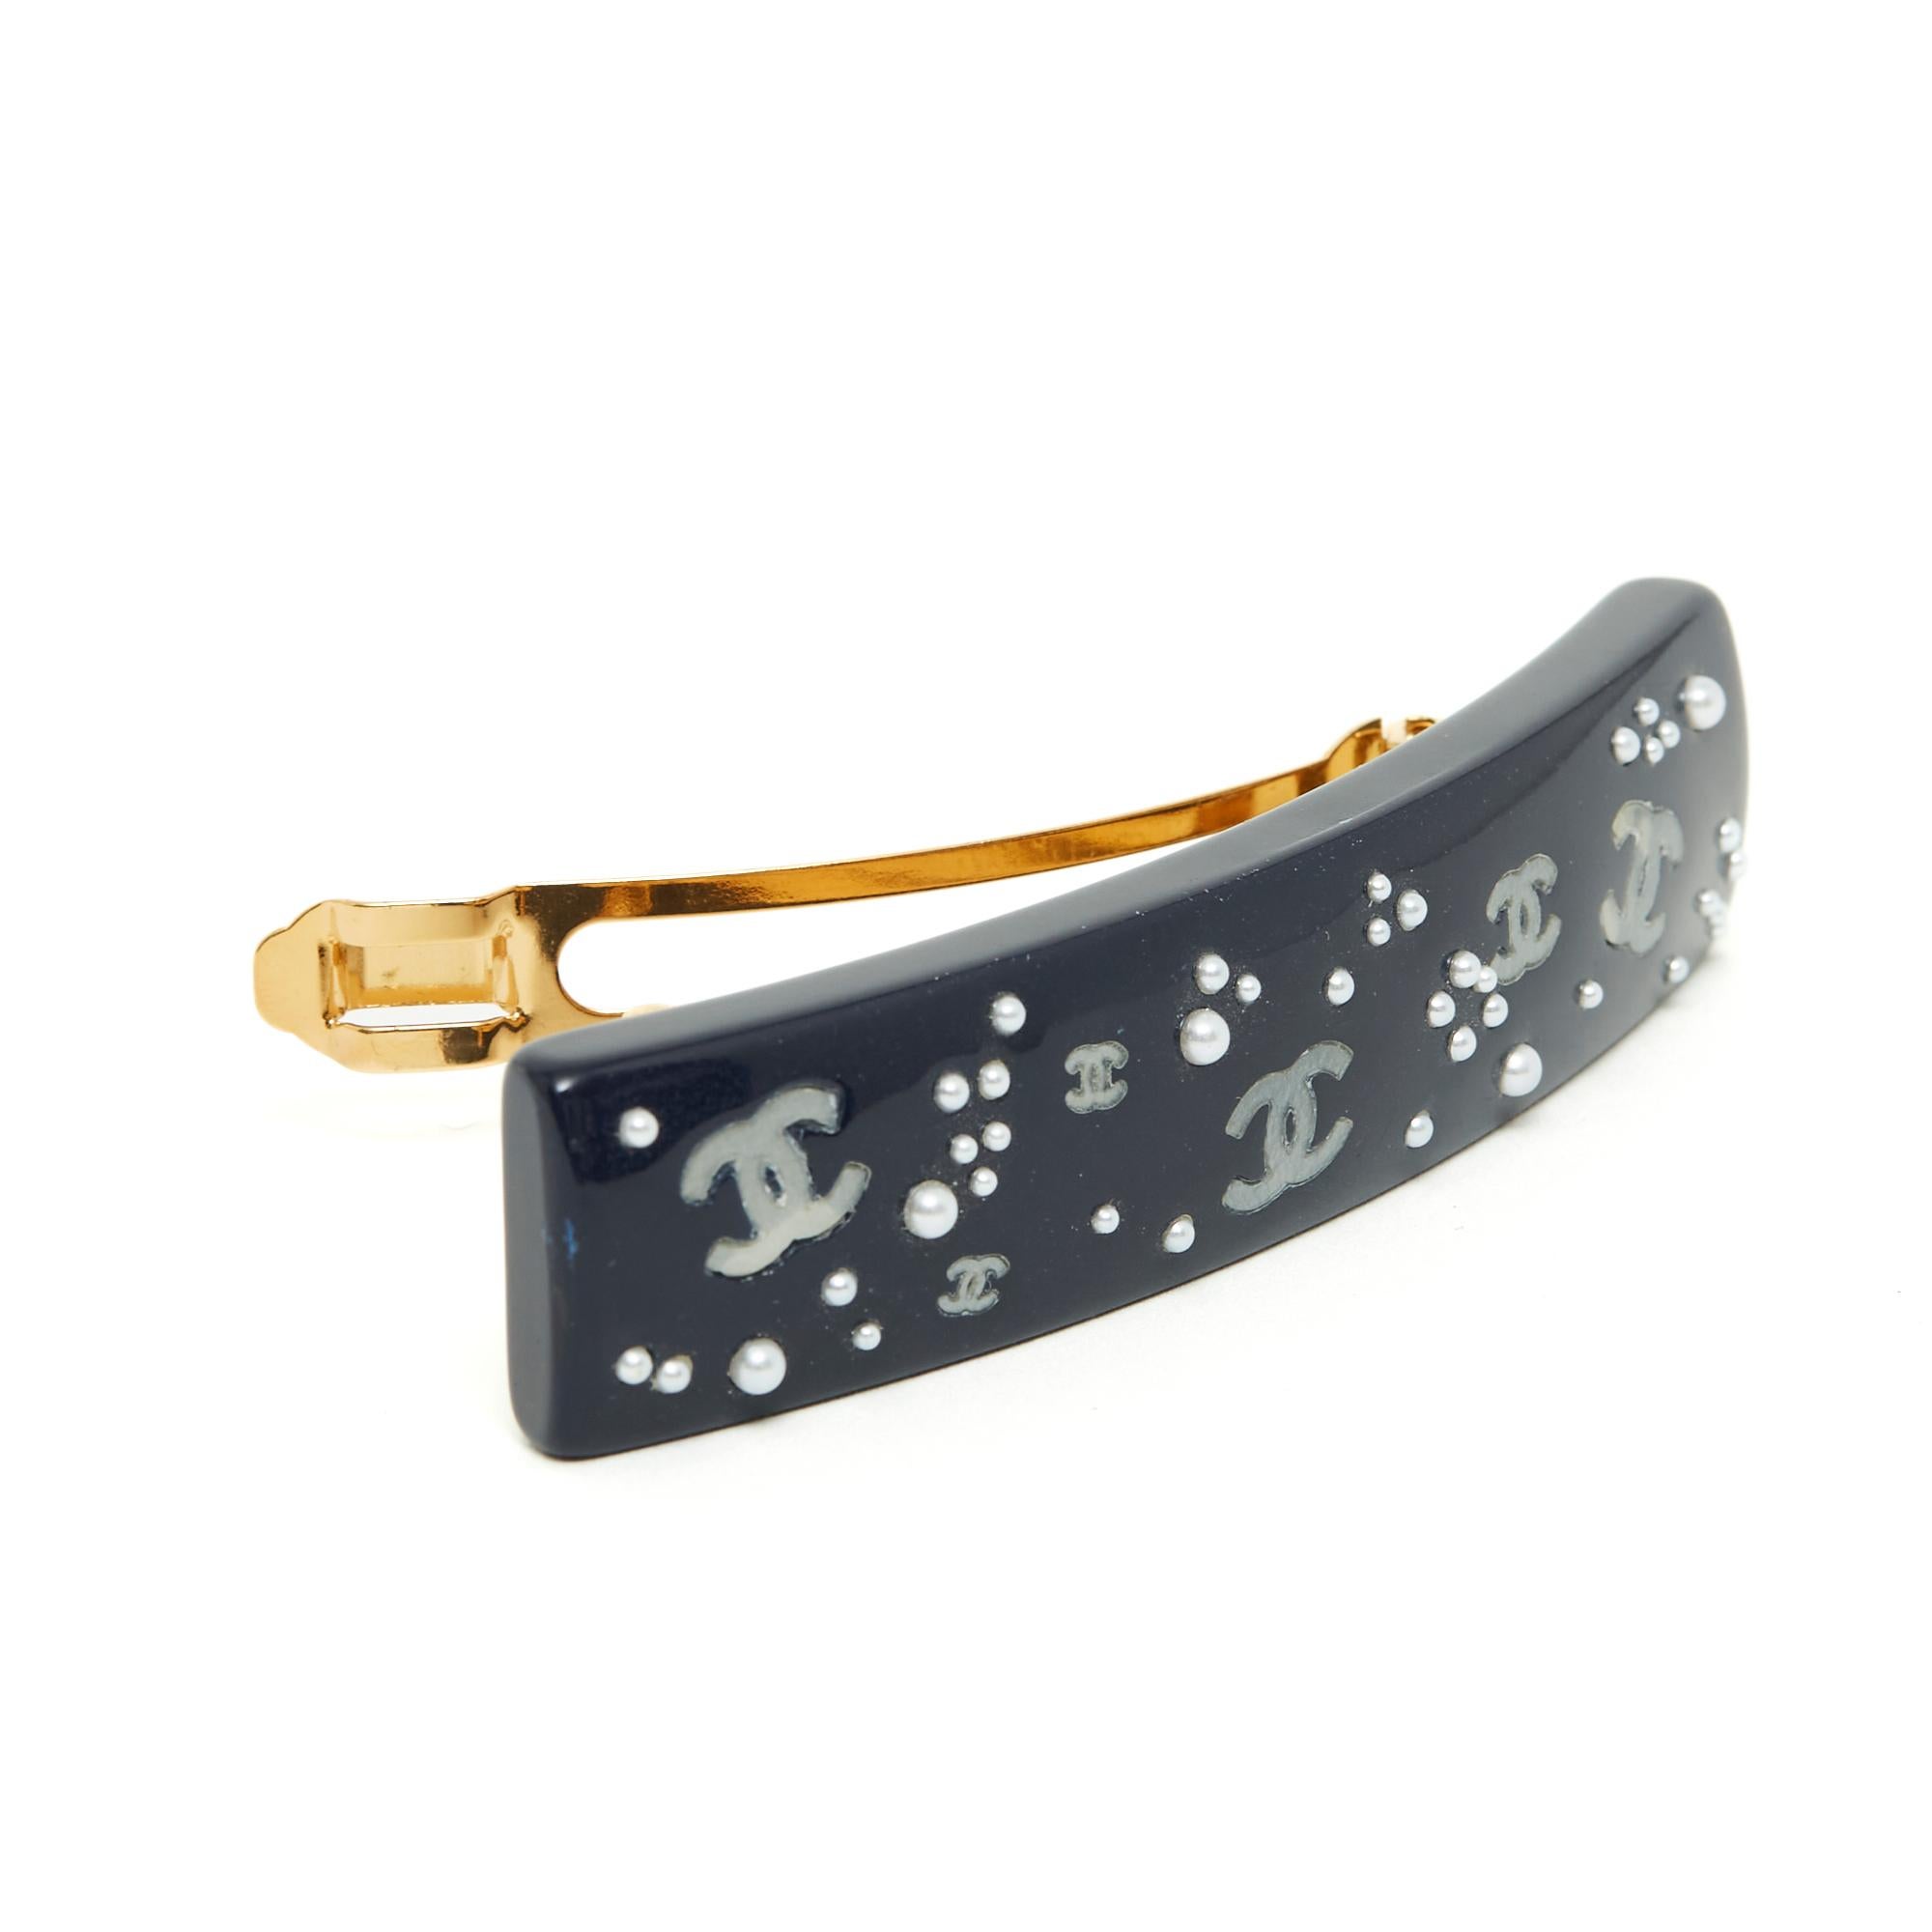 Chanel hairclip, FW2003 collection, XL format in midnight blue (very dark) resin inlaid with fancy pearls of different sizes and slightly iridescent gold CC. Length 10.2 cm x width 2.2 cm, dimensions of the metal bar 6.5 x 1 cm. The barrette is